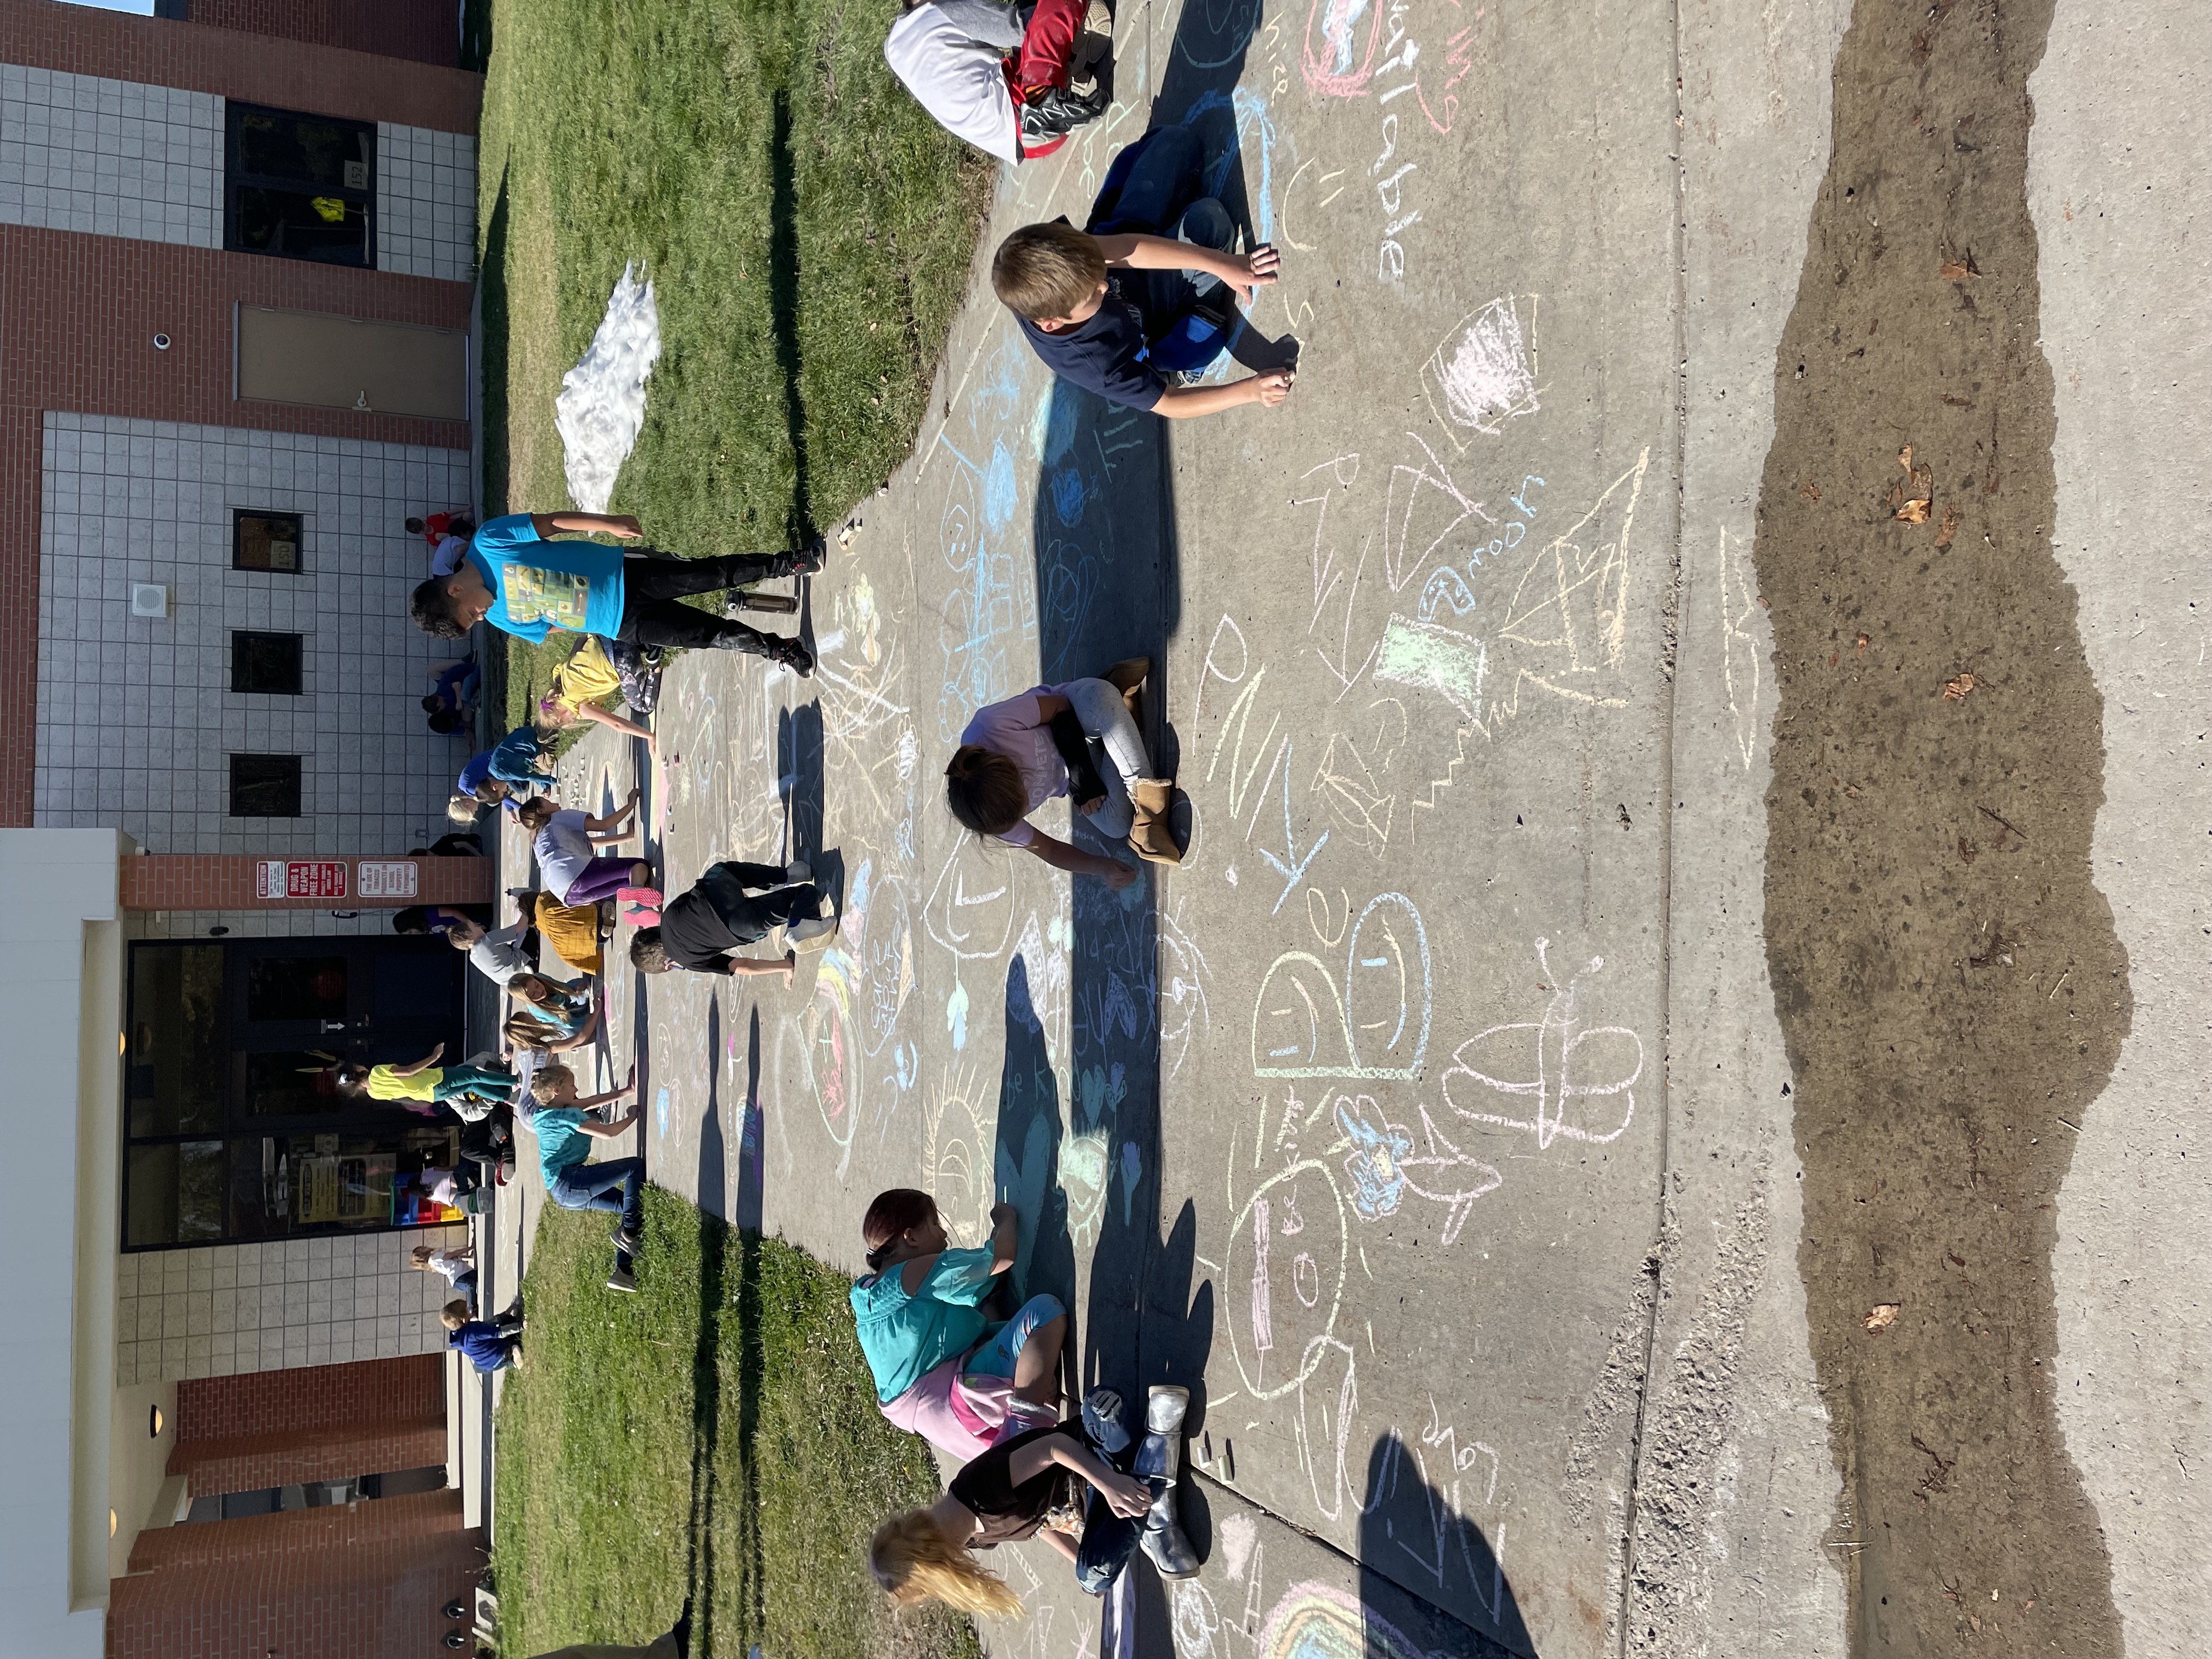 1st and 3rd Graders chalk the sidewalks encouraging unity